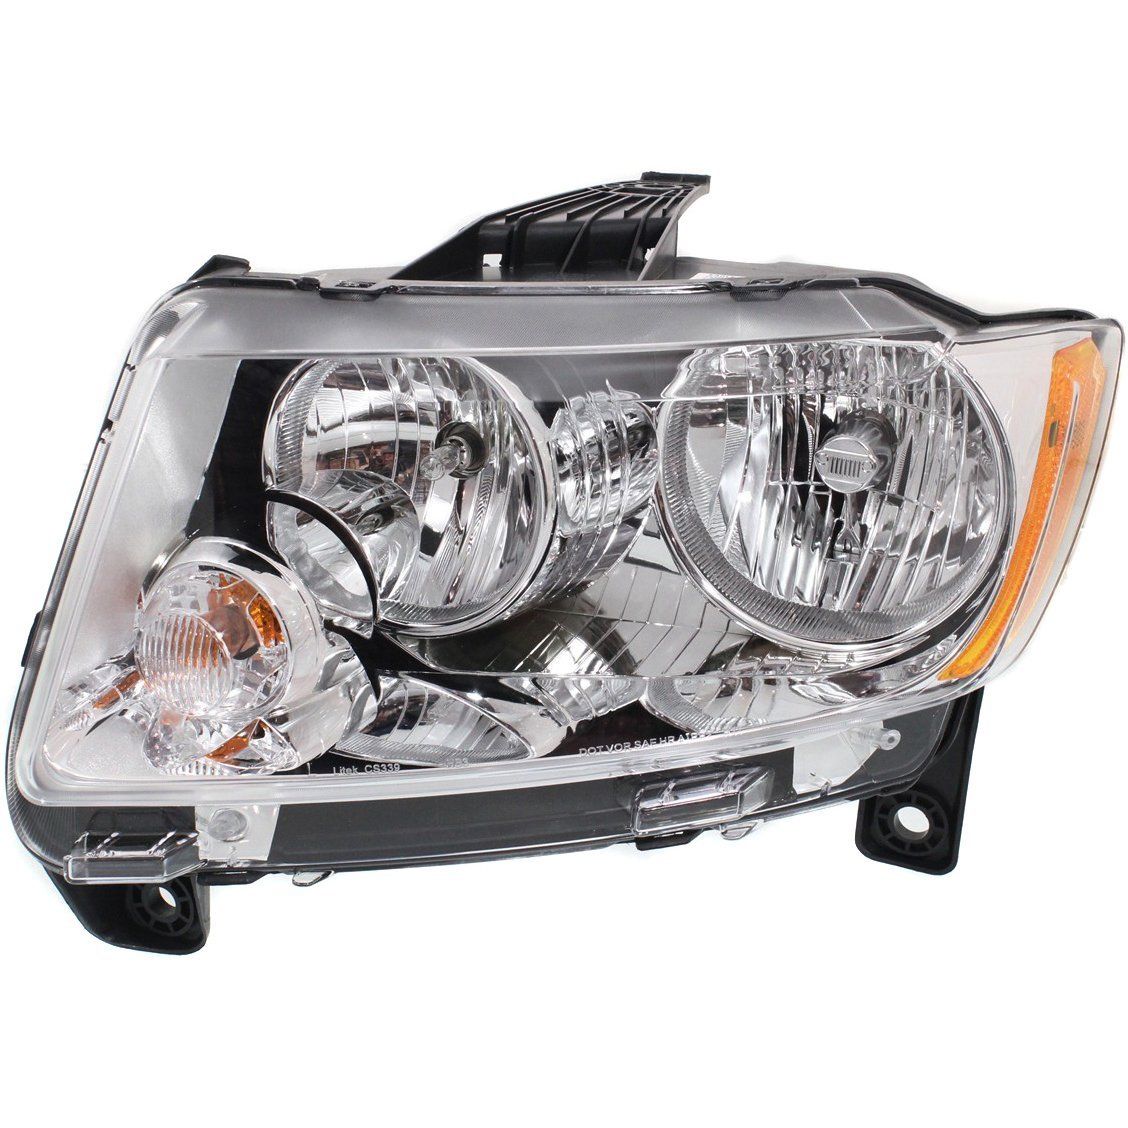 Headlight For 2011-2013 Jeep Grand Cherokee Driver Side w/ bulb | eBay Headlight Bulb For 2011 Jeep Grand Cherokee